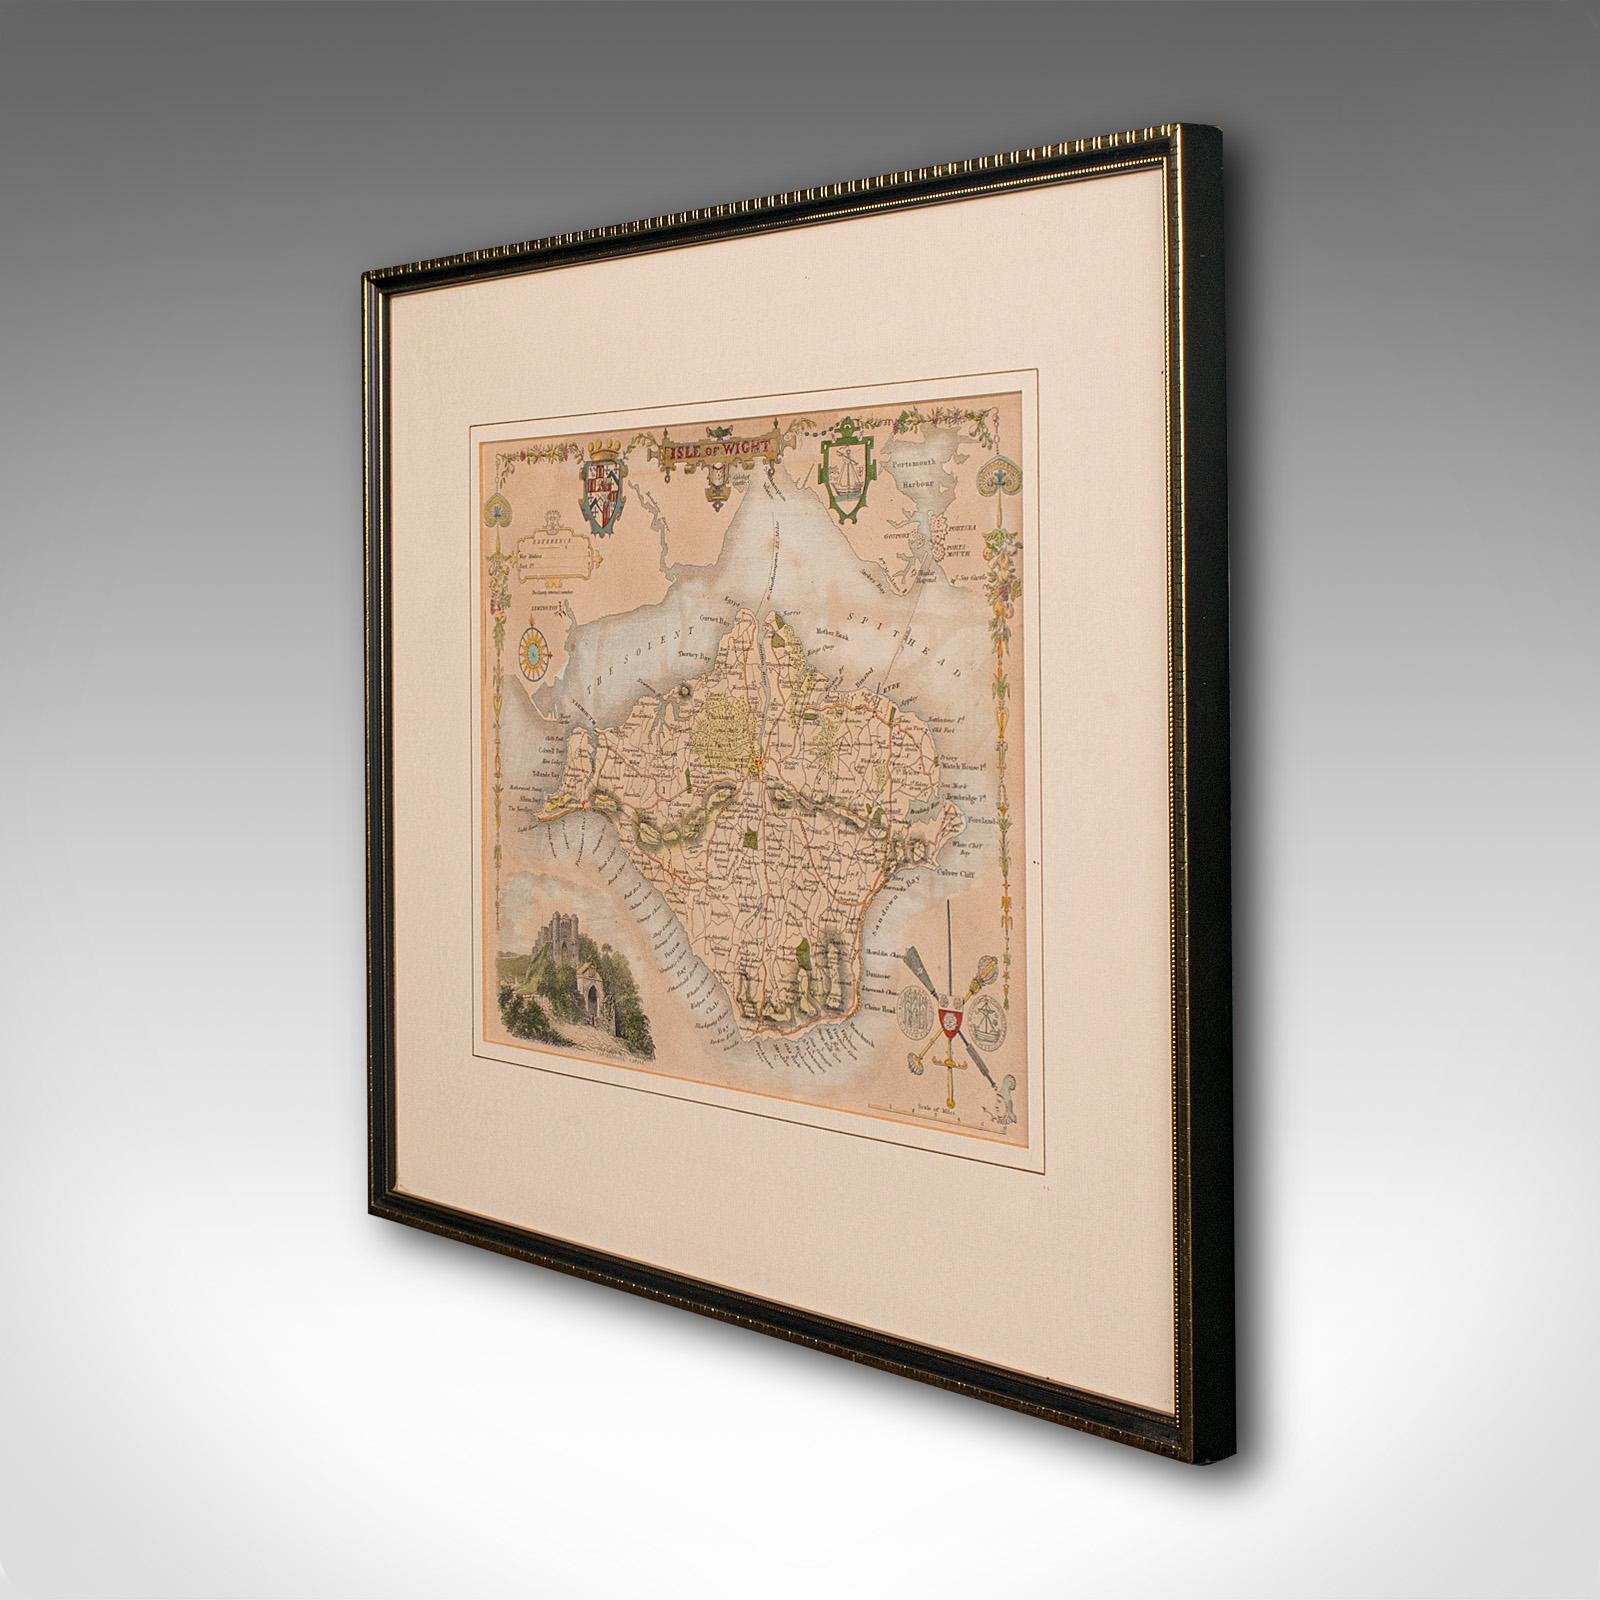 Regency Antique Lithography Map, Isle of Wight, English, Framed, Engraving, Cartography For Sale